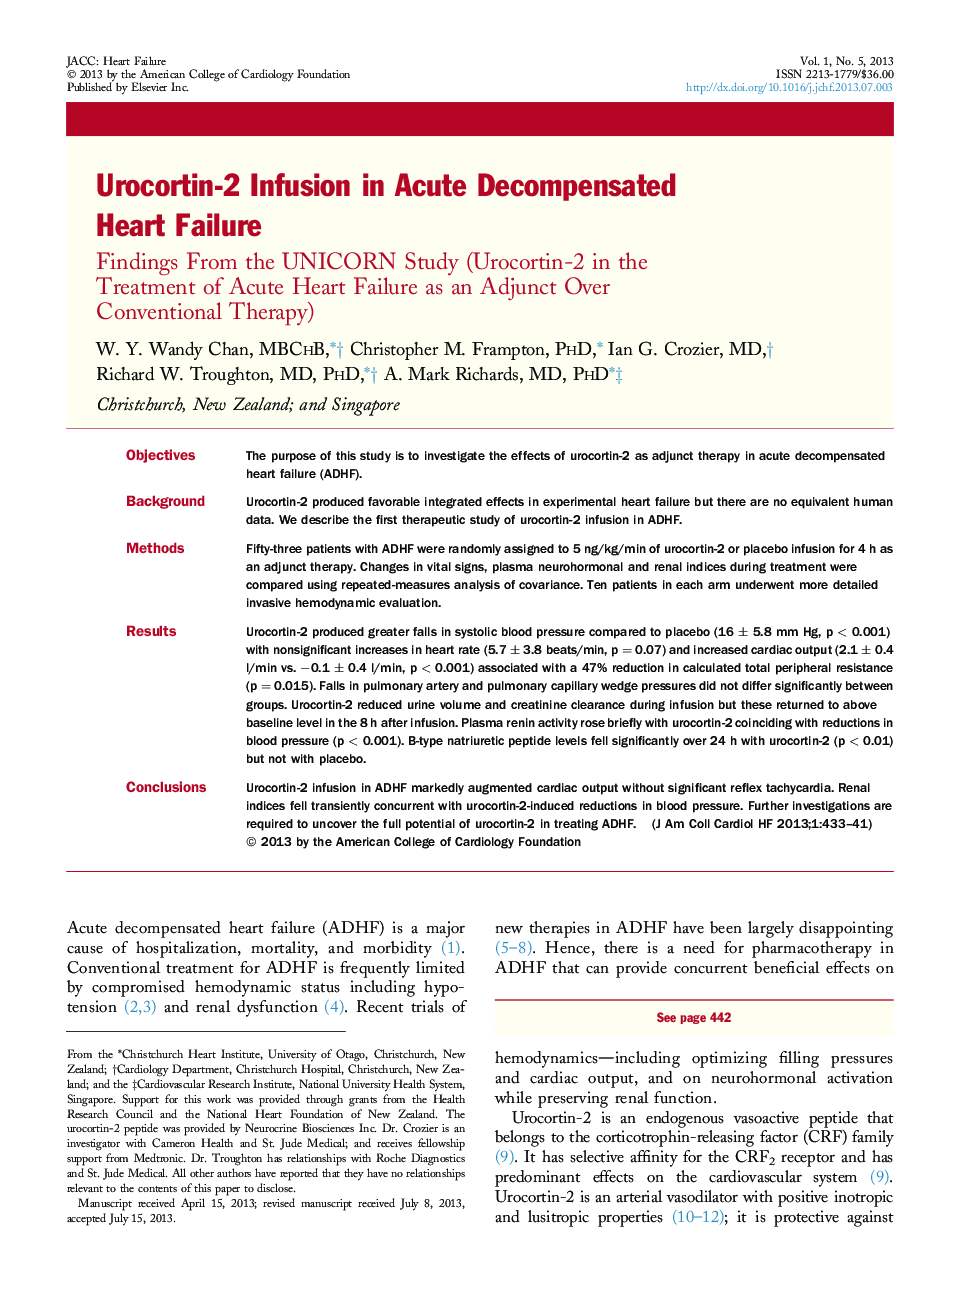 Urocortin-2 Infusion in Acute Decompensated Heart Failure : Findings From the UNICORN Study (Urocortin-2 in the Treatment of Acute Heart Failure as an Adjunct Over Conventional Therapy)